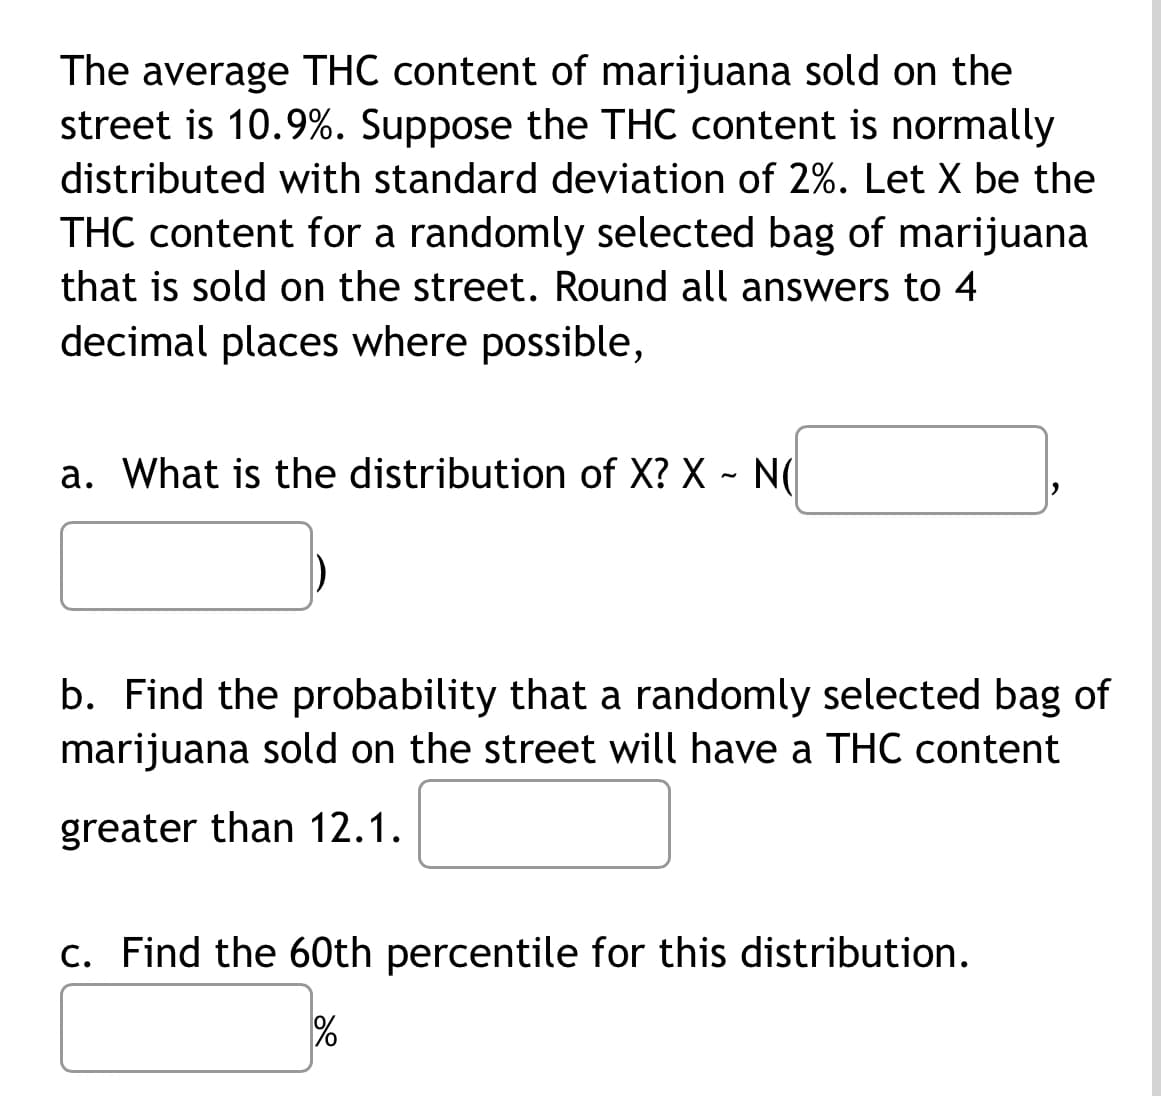 The average THC content of marijuana sold on the
street is 10.9%. Suppose the THC content is normally
distributed with standard deviation of 2%. Let X be the
THC content for a randomly selected bag of marijuana
that is sold on the street. Round all answers to 4
decimal places where possible,
a. What is the distribution of X? X ~ N(
2
b. Find the probability that a randomly selected bag of
marijuana sold on the street will have a THC content
greater than 12.1.
c. Find the 60th percentile for this distribution.
%